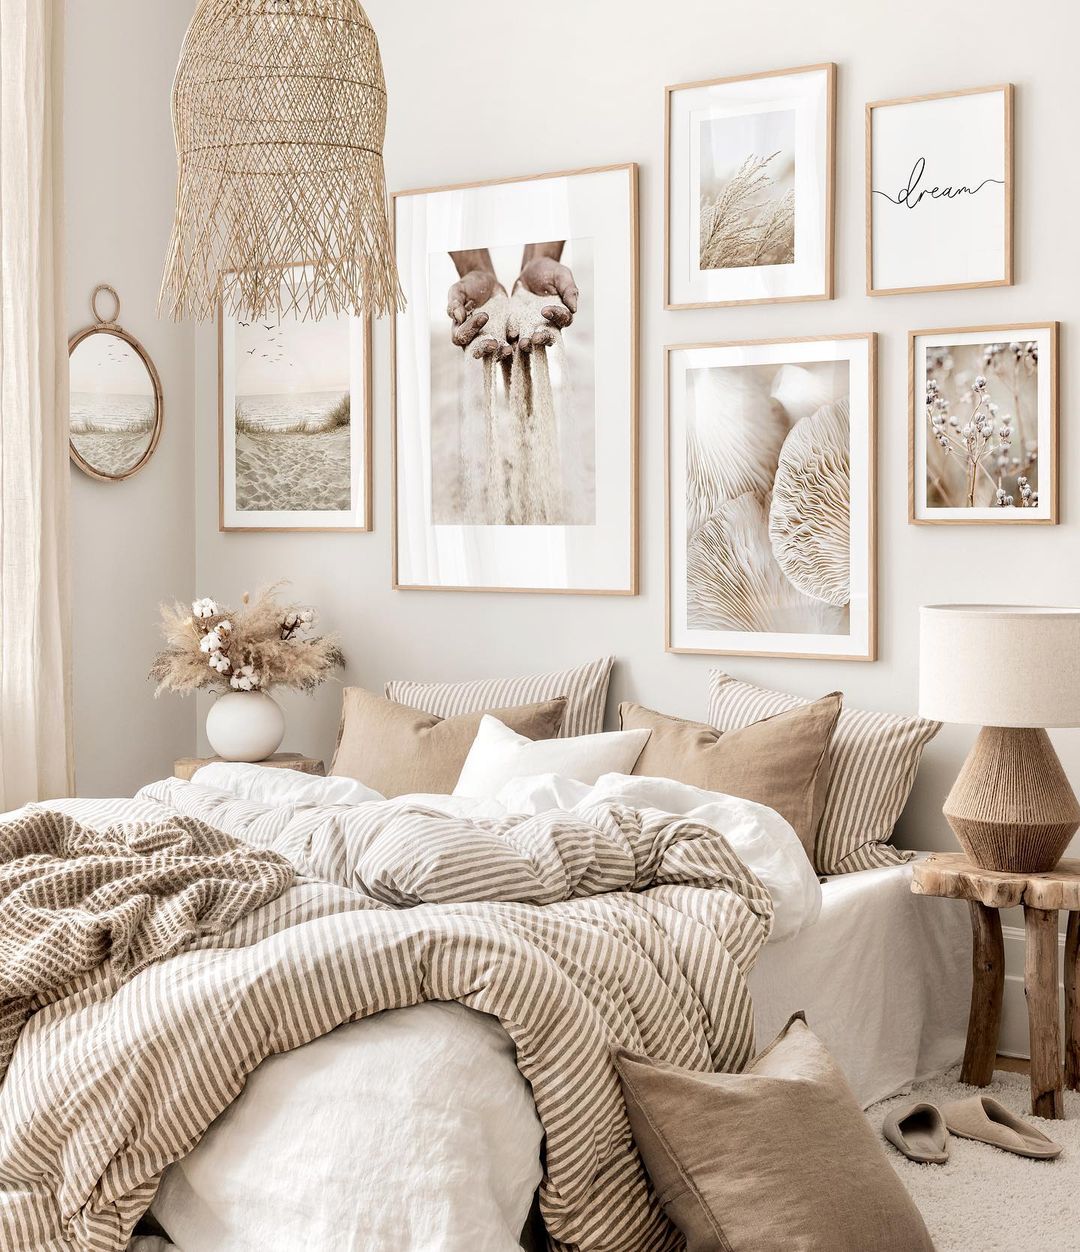 Top 4 Decorating Ideas For A Better Bedroom in 4 - Decoholic